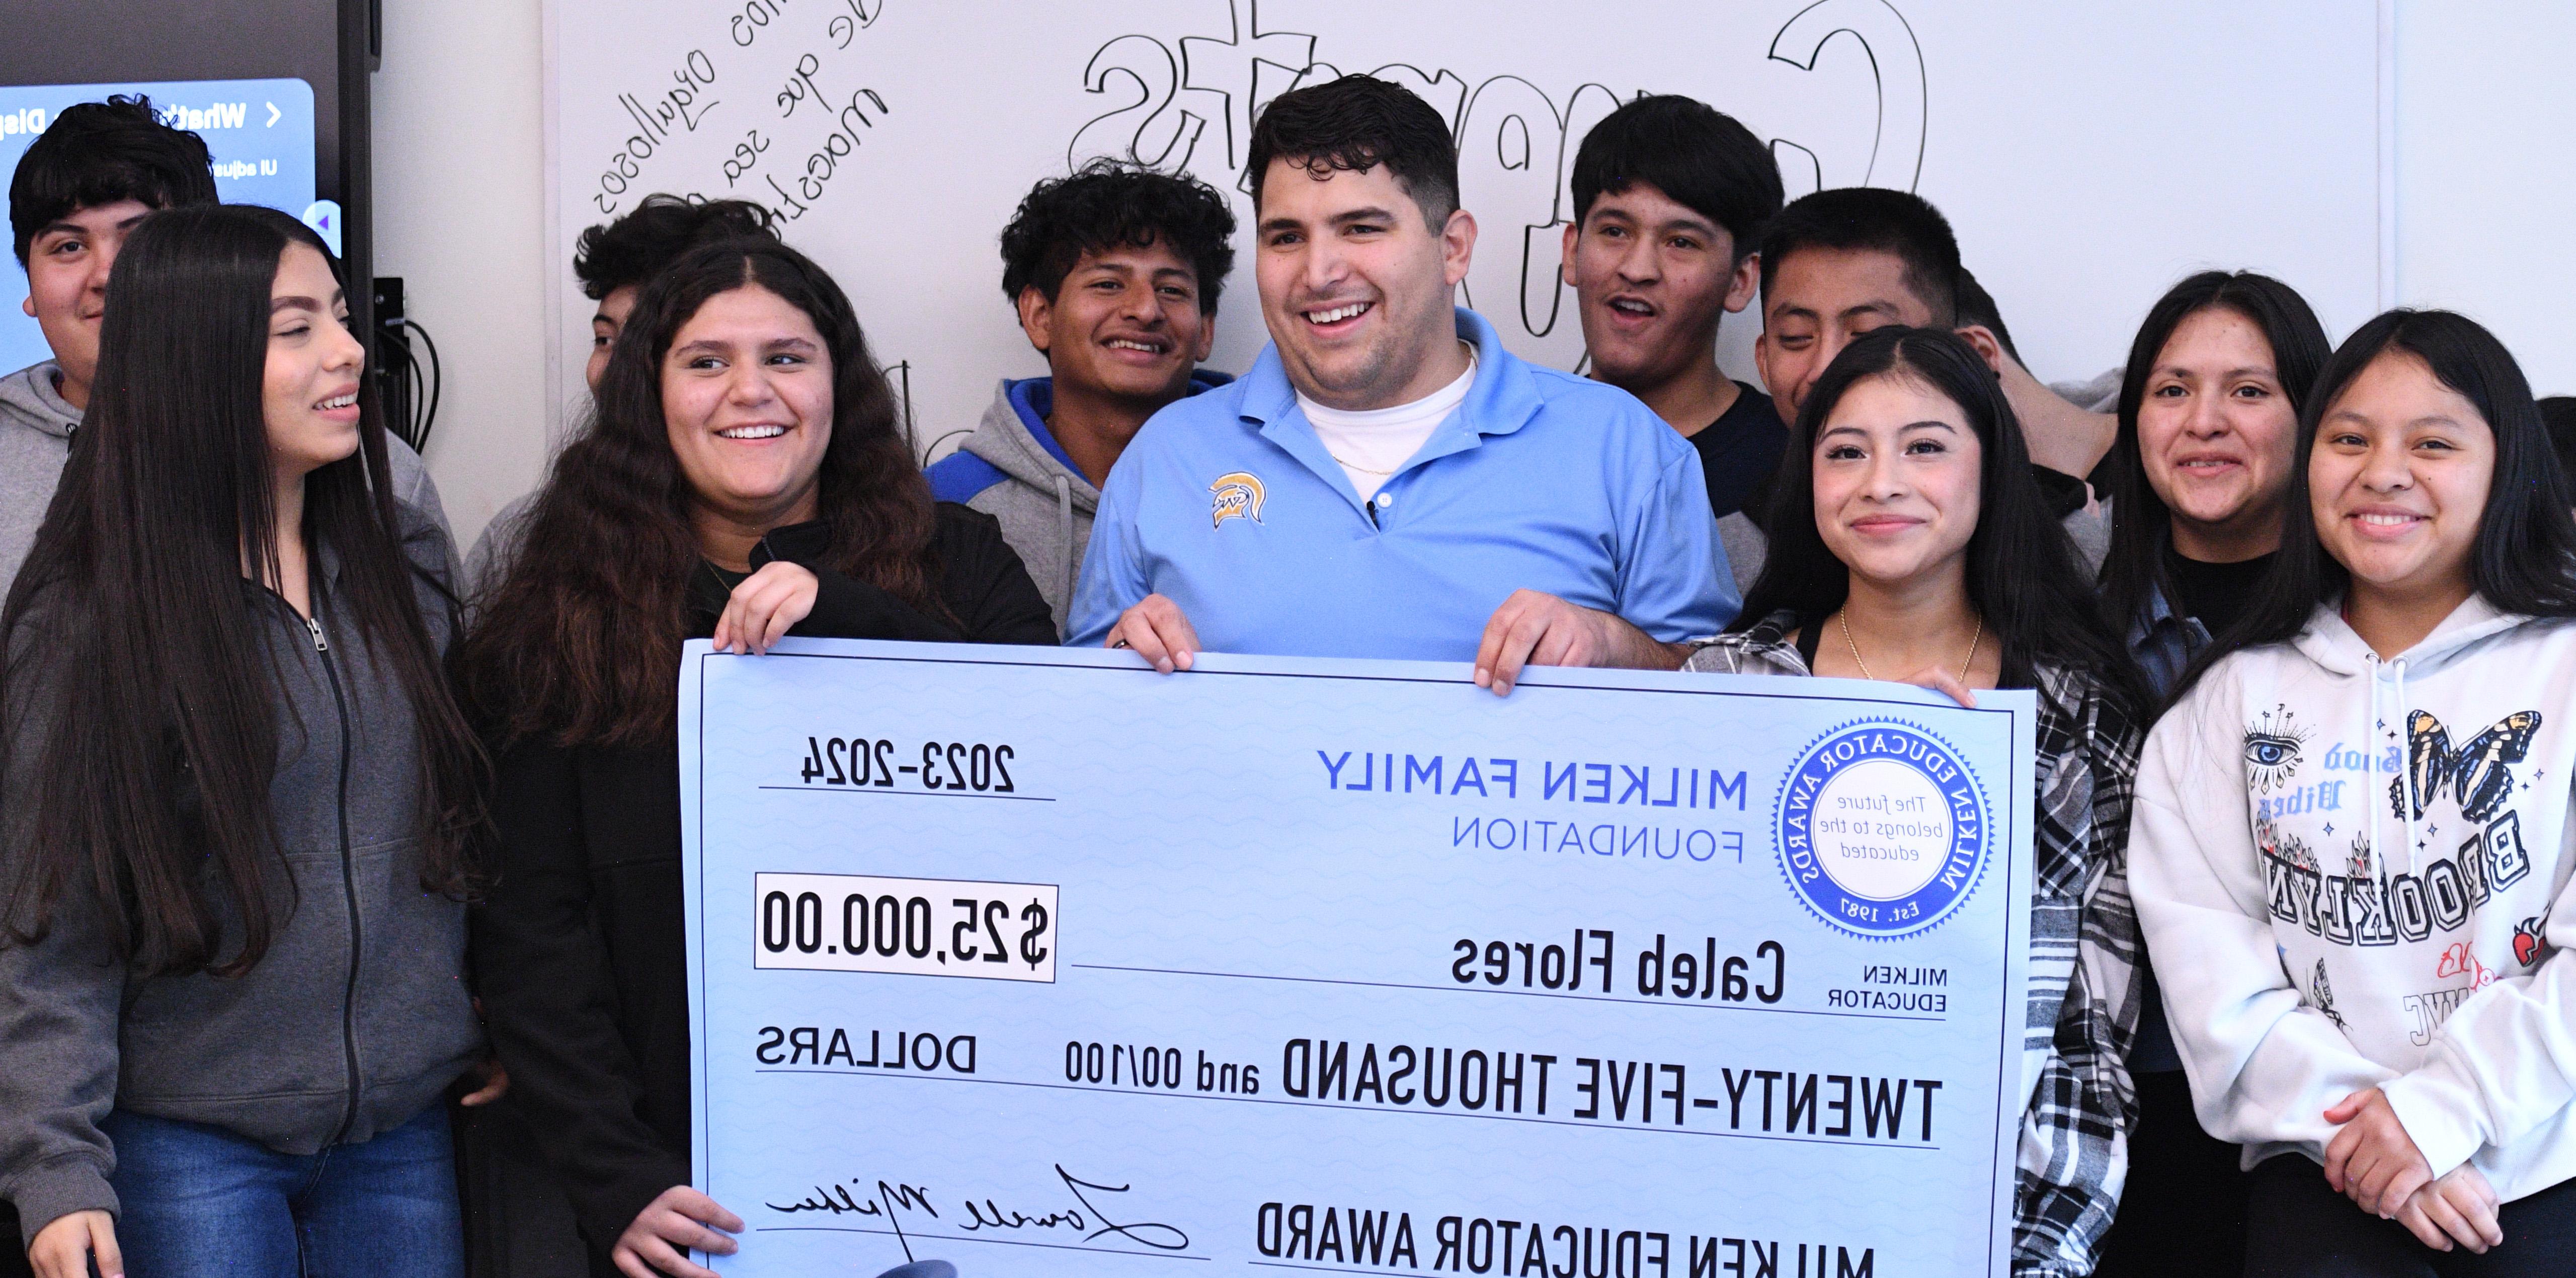 Caleb Flores holding up a big check with his students standing behind him